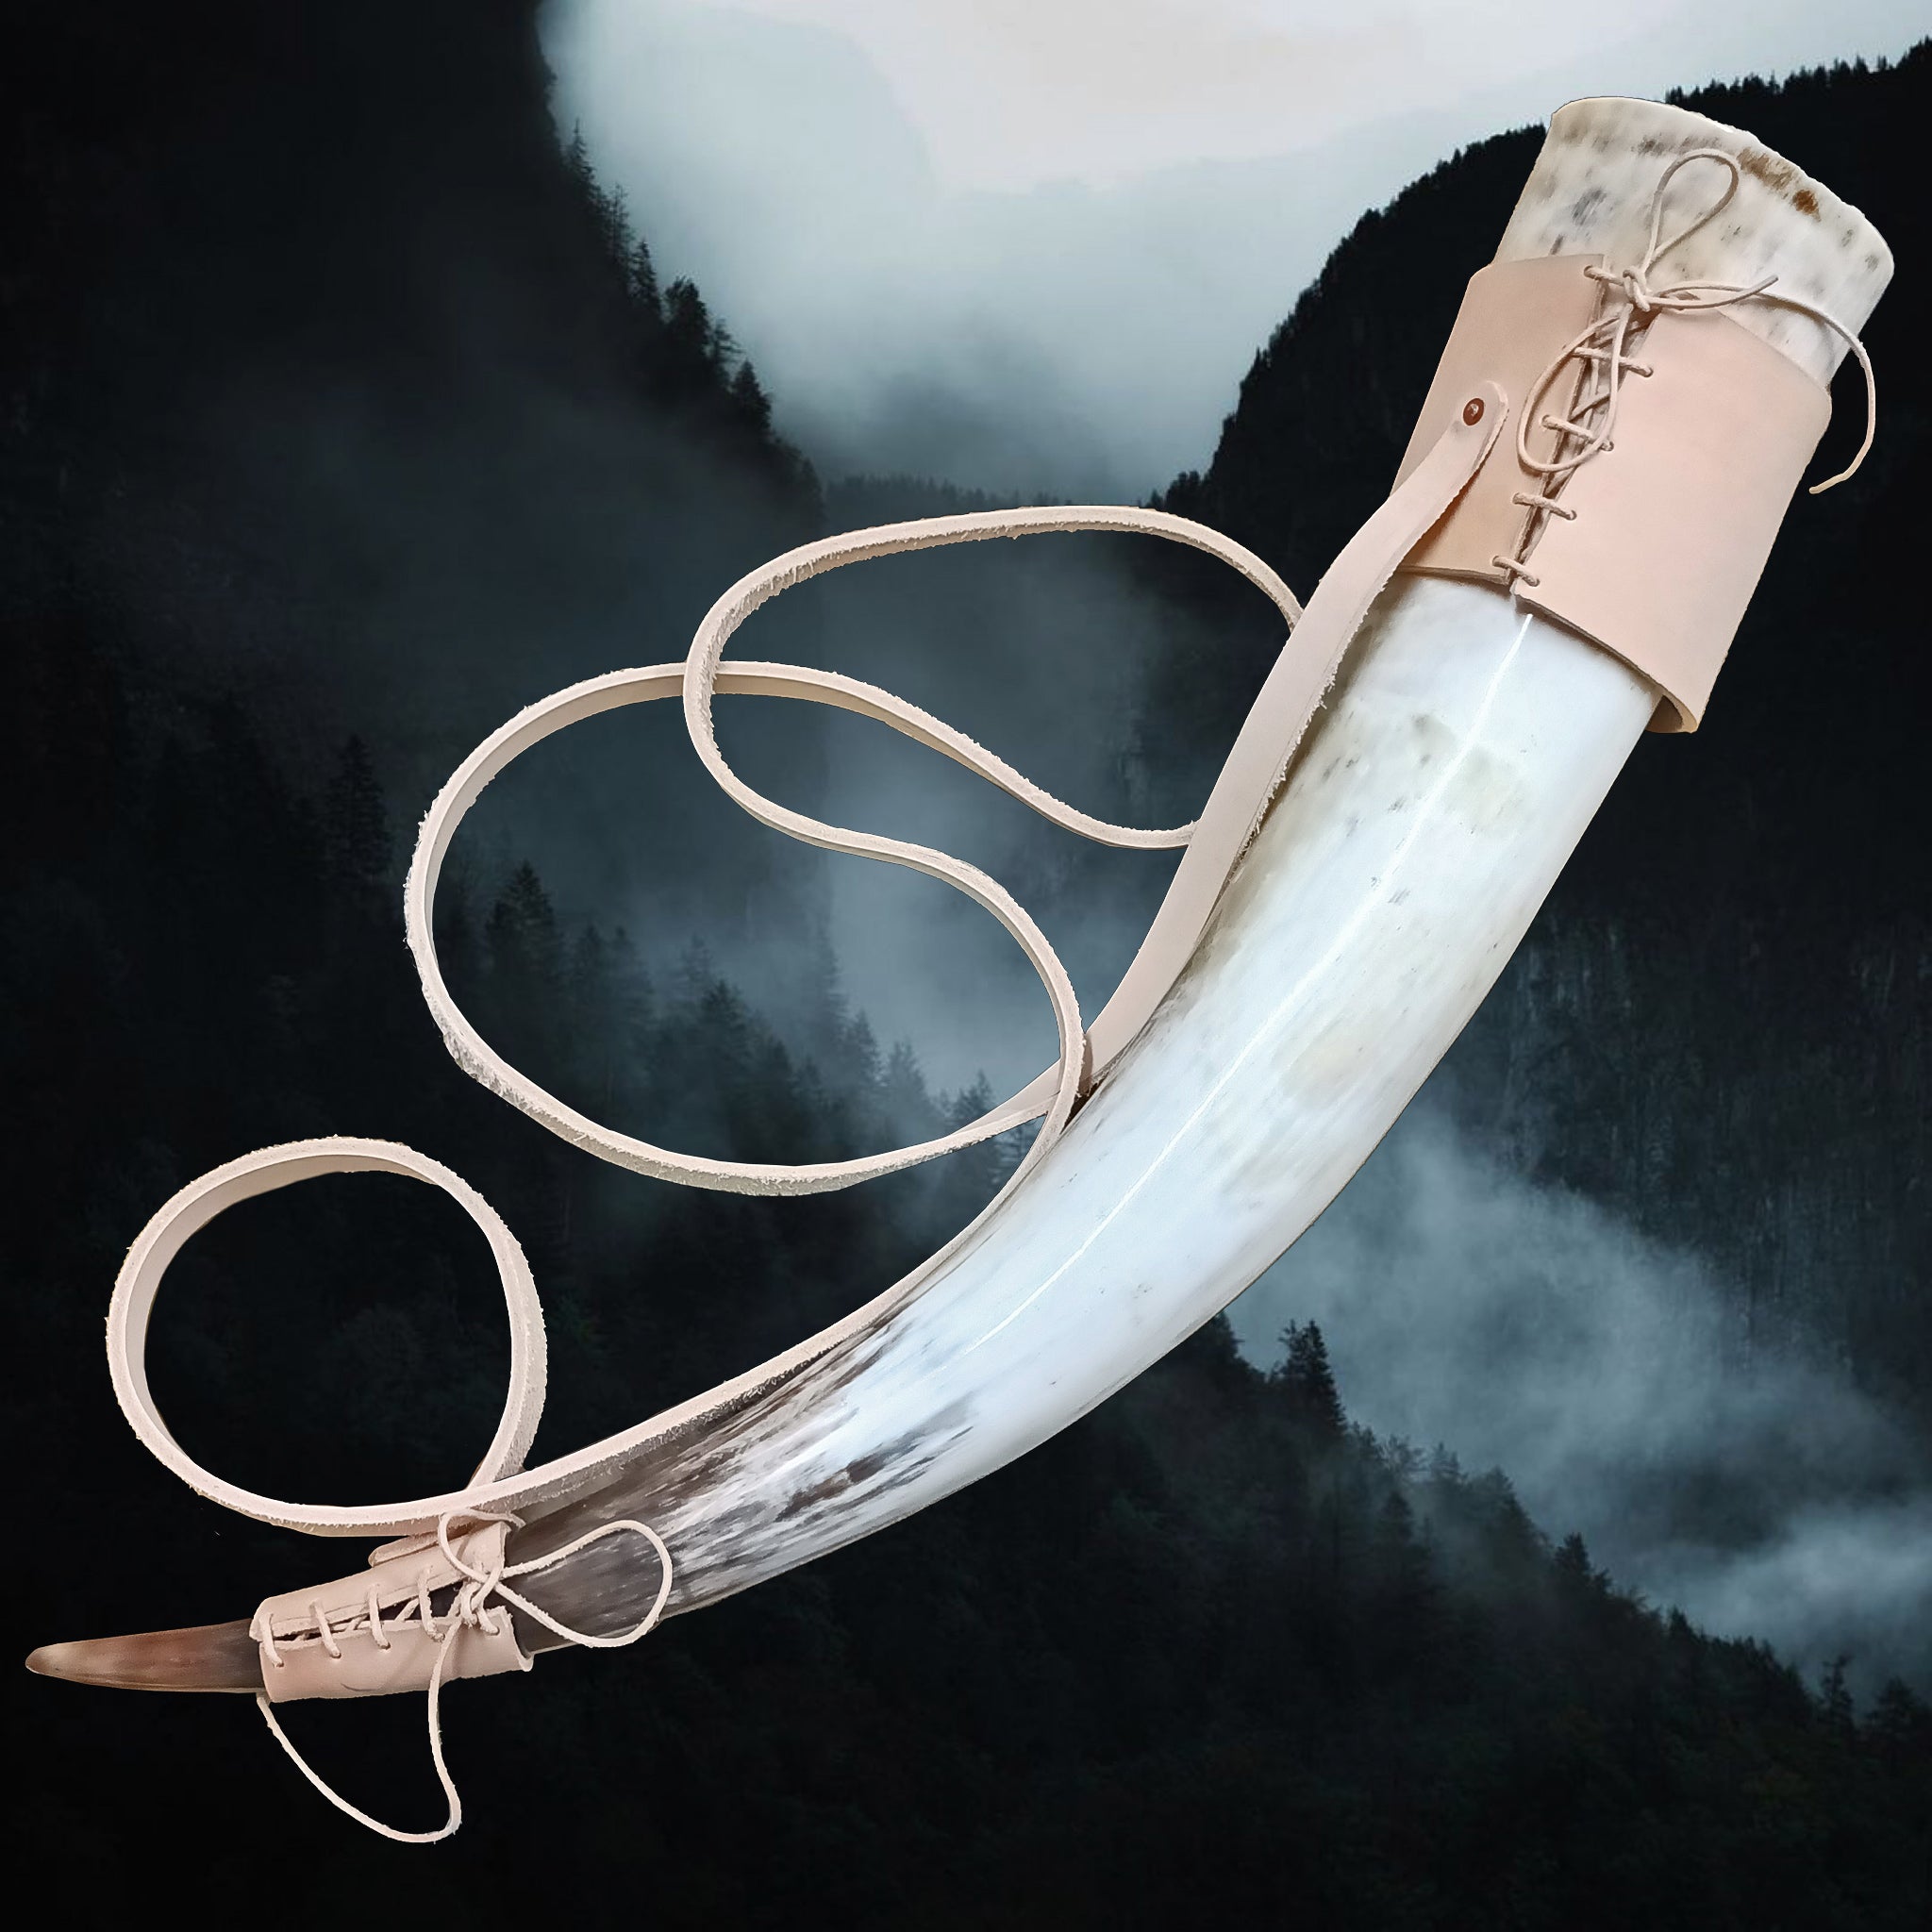 Leather Shoulder Strap for Viking Drinking Horn with Drinking Horn - Natural Veg Tan